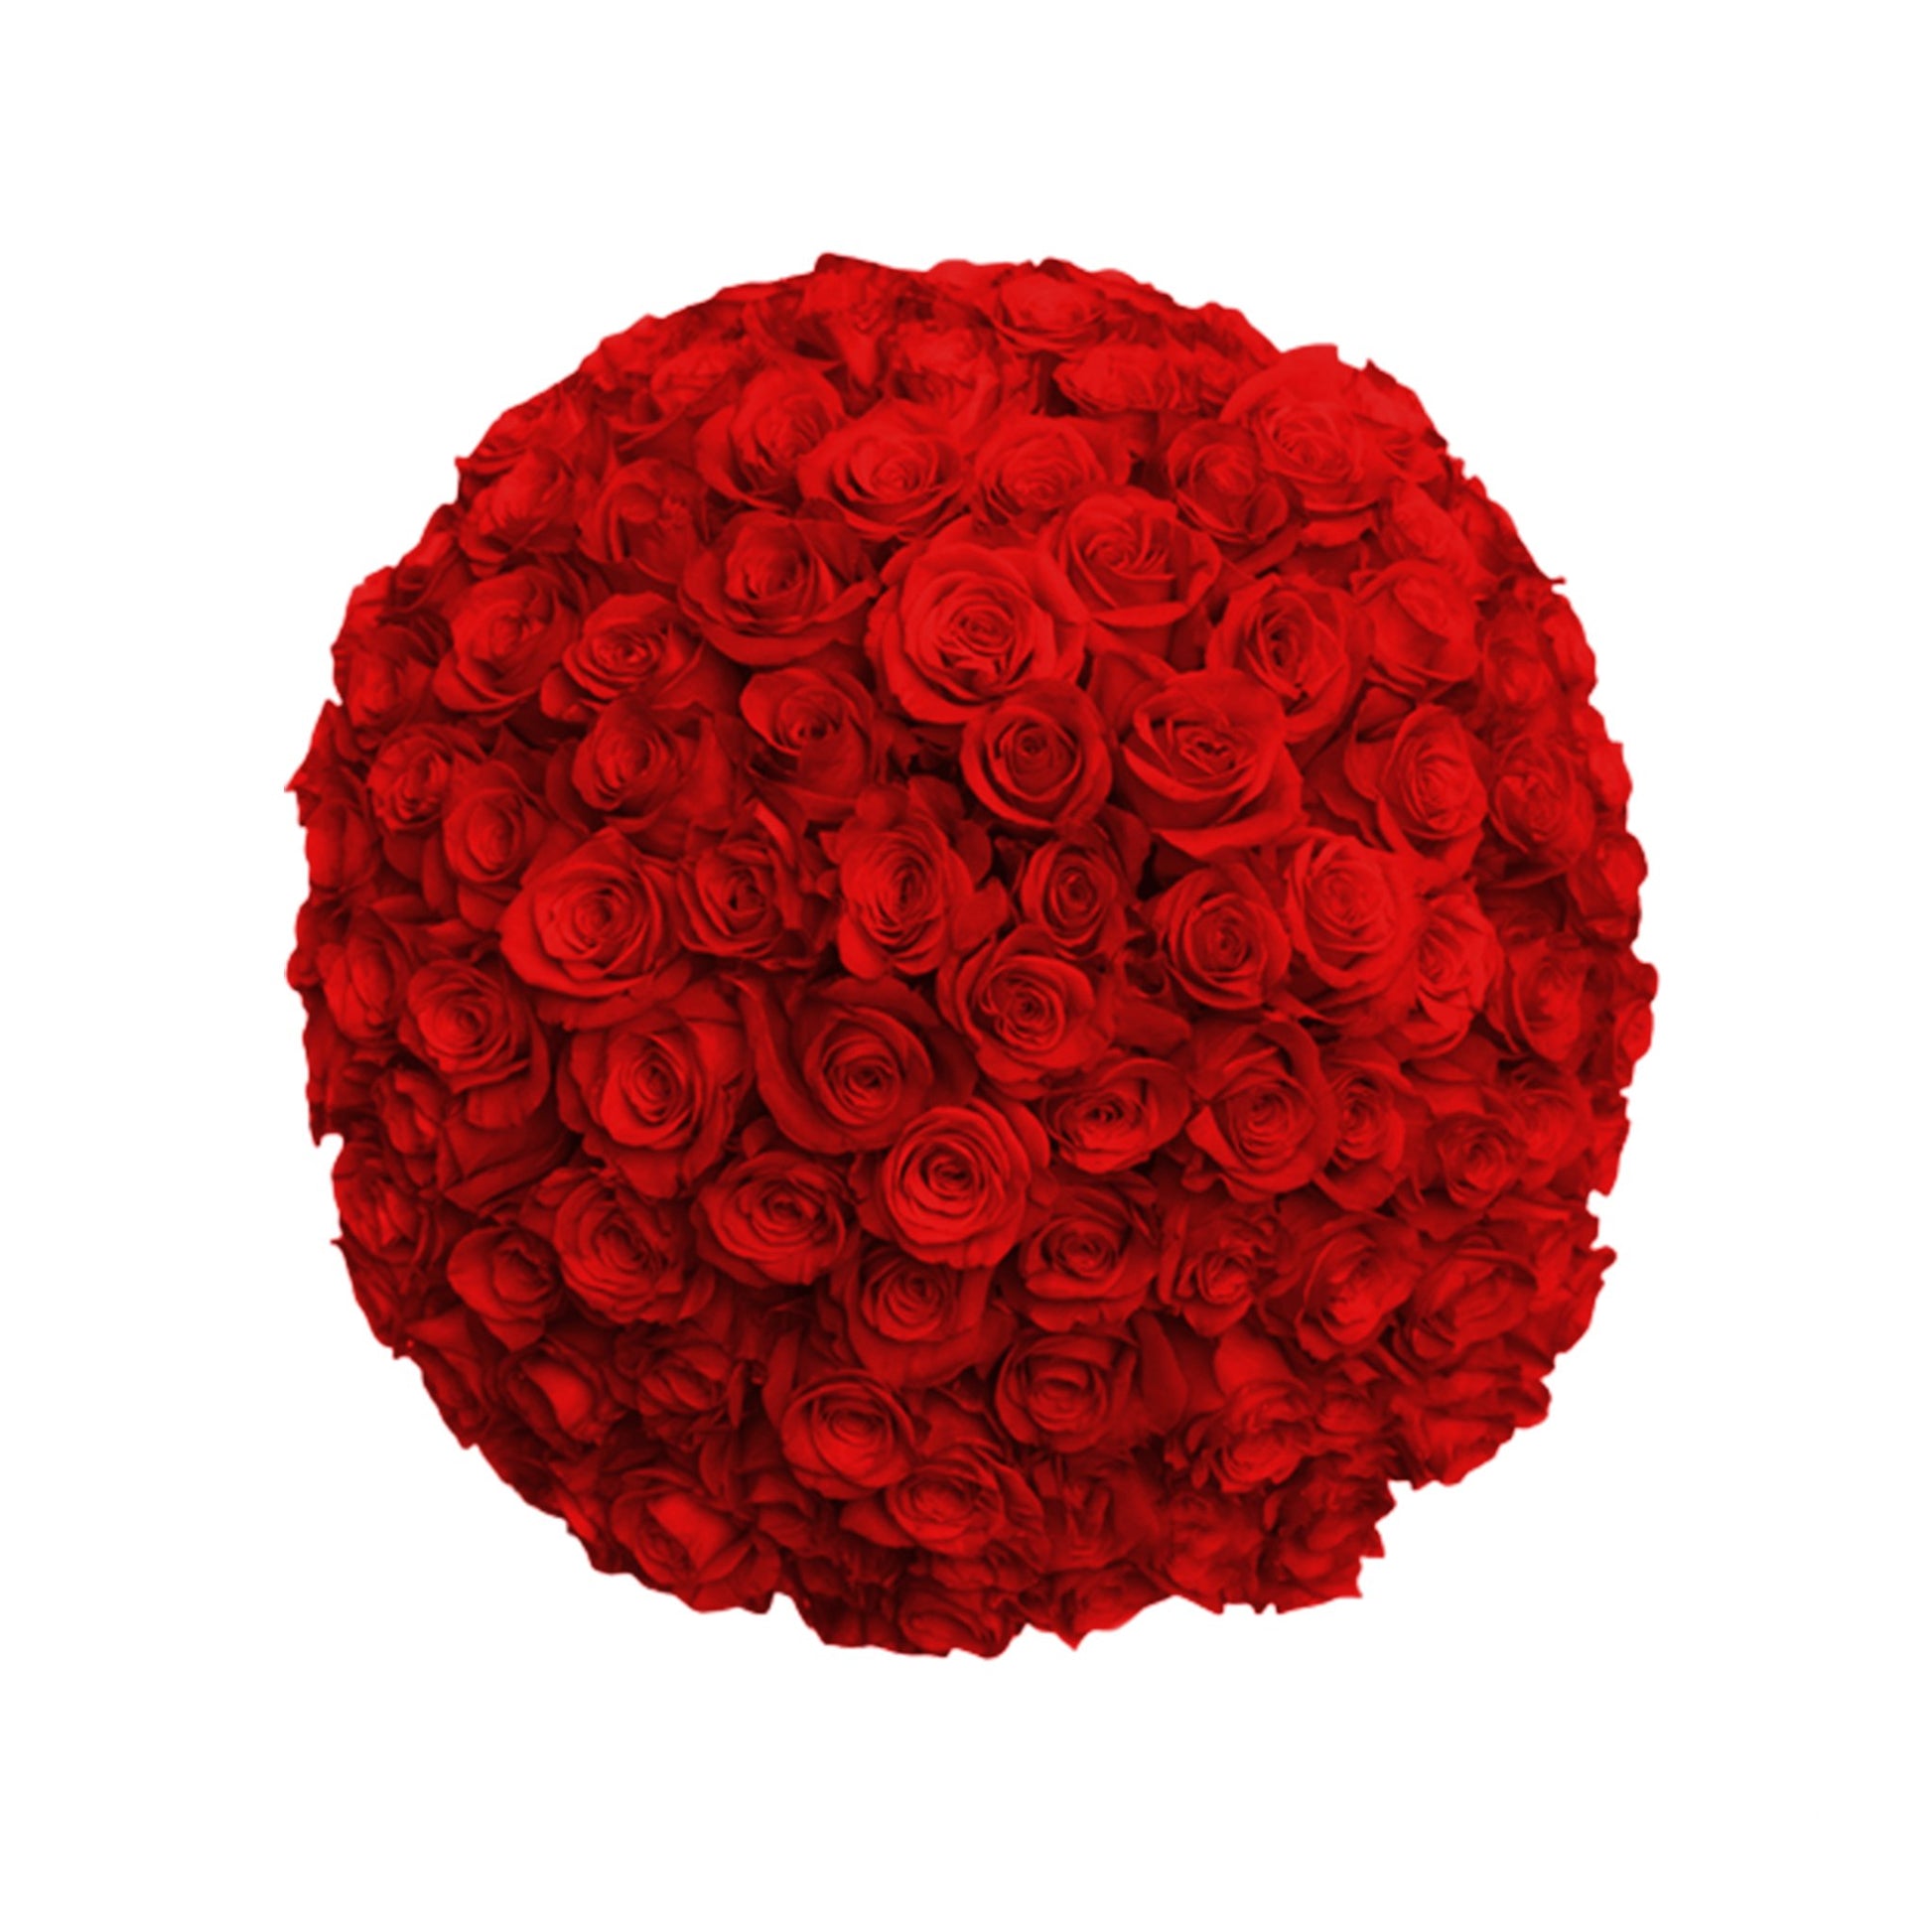 NYC Flower Delivery - Fresh Roses in a Vase | 100 Red Roses - Roses